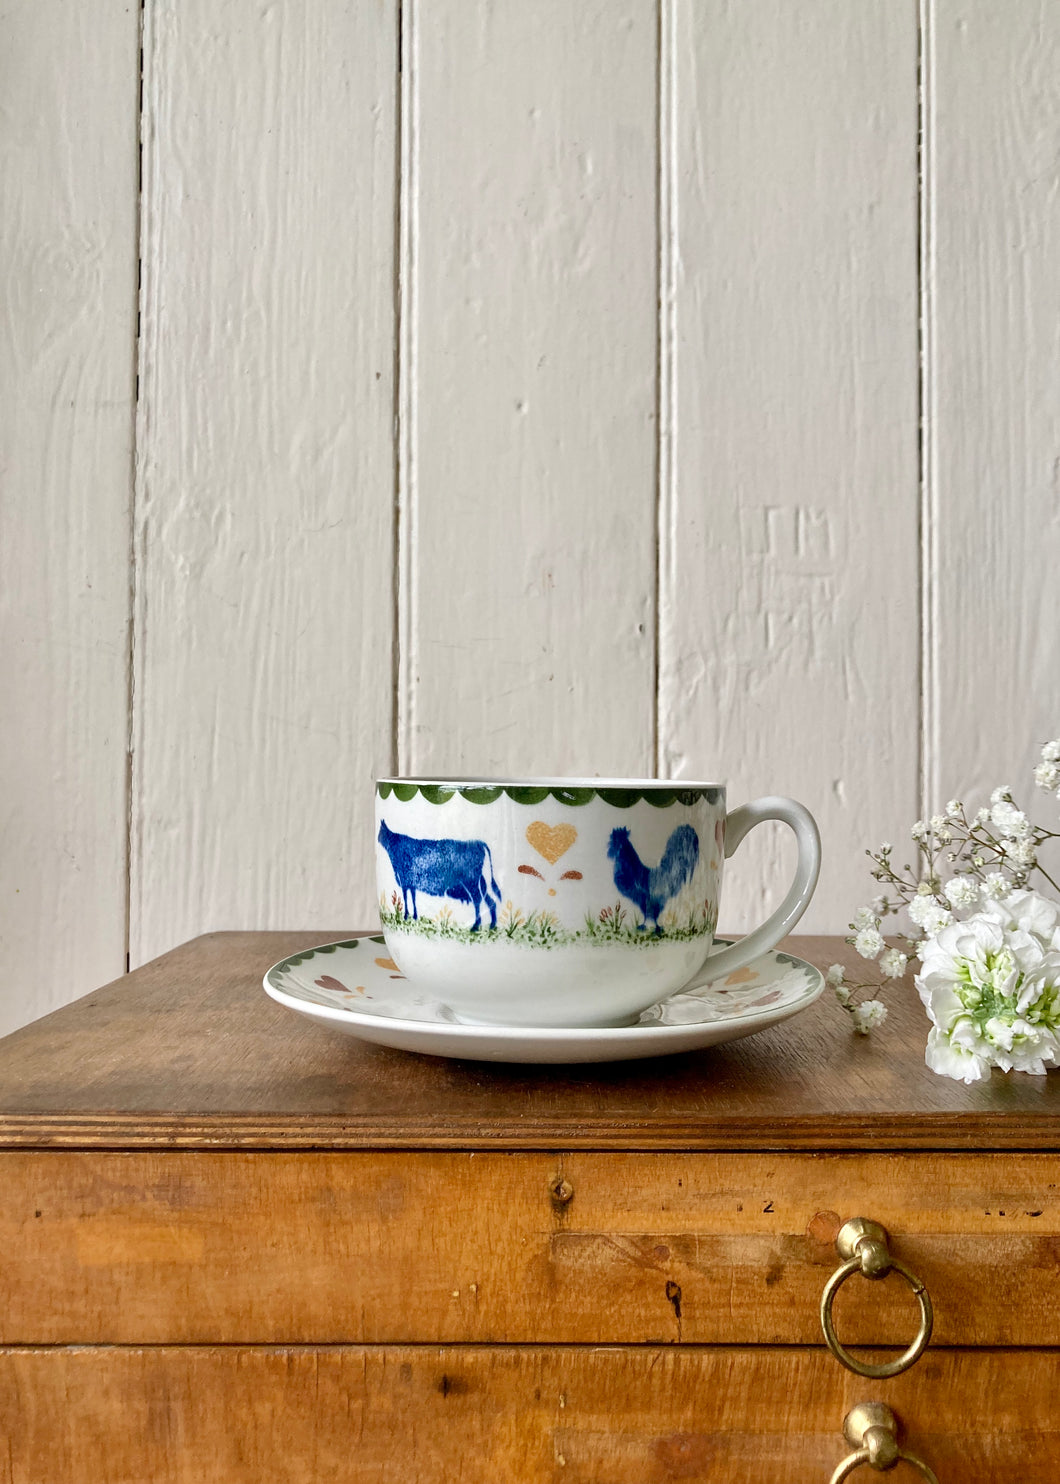 Large breakfast cup and saucer by Wood & Sons